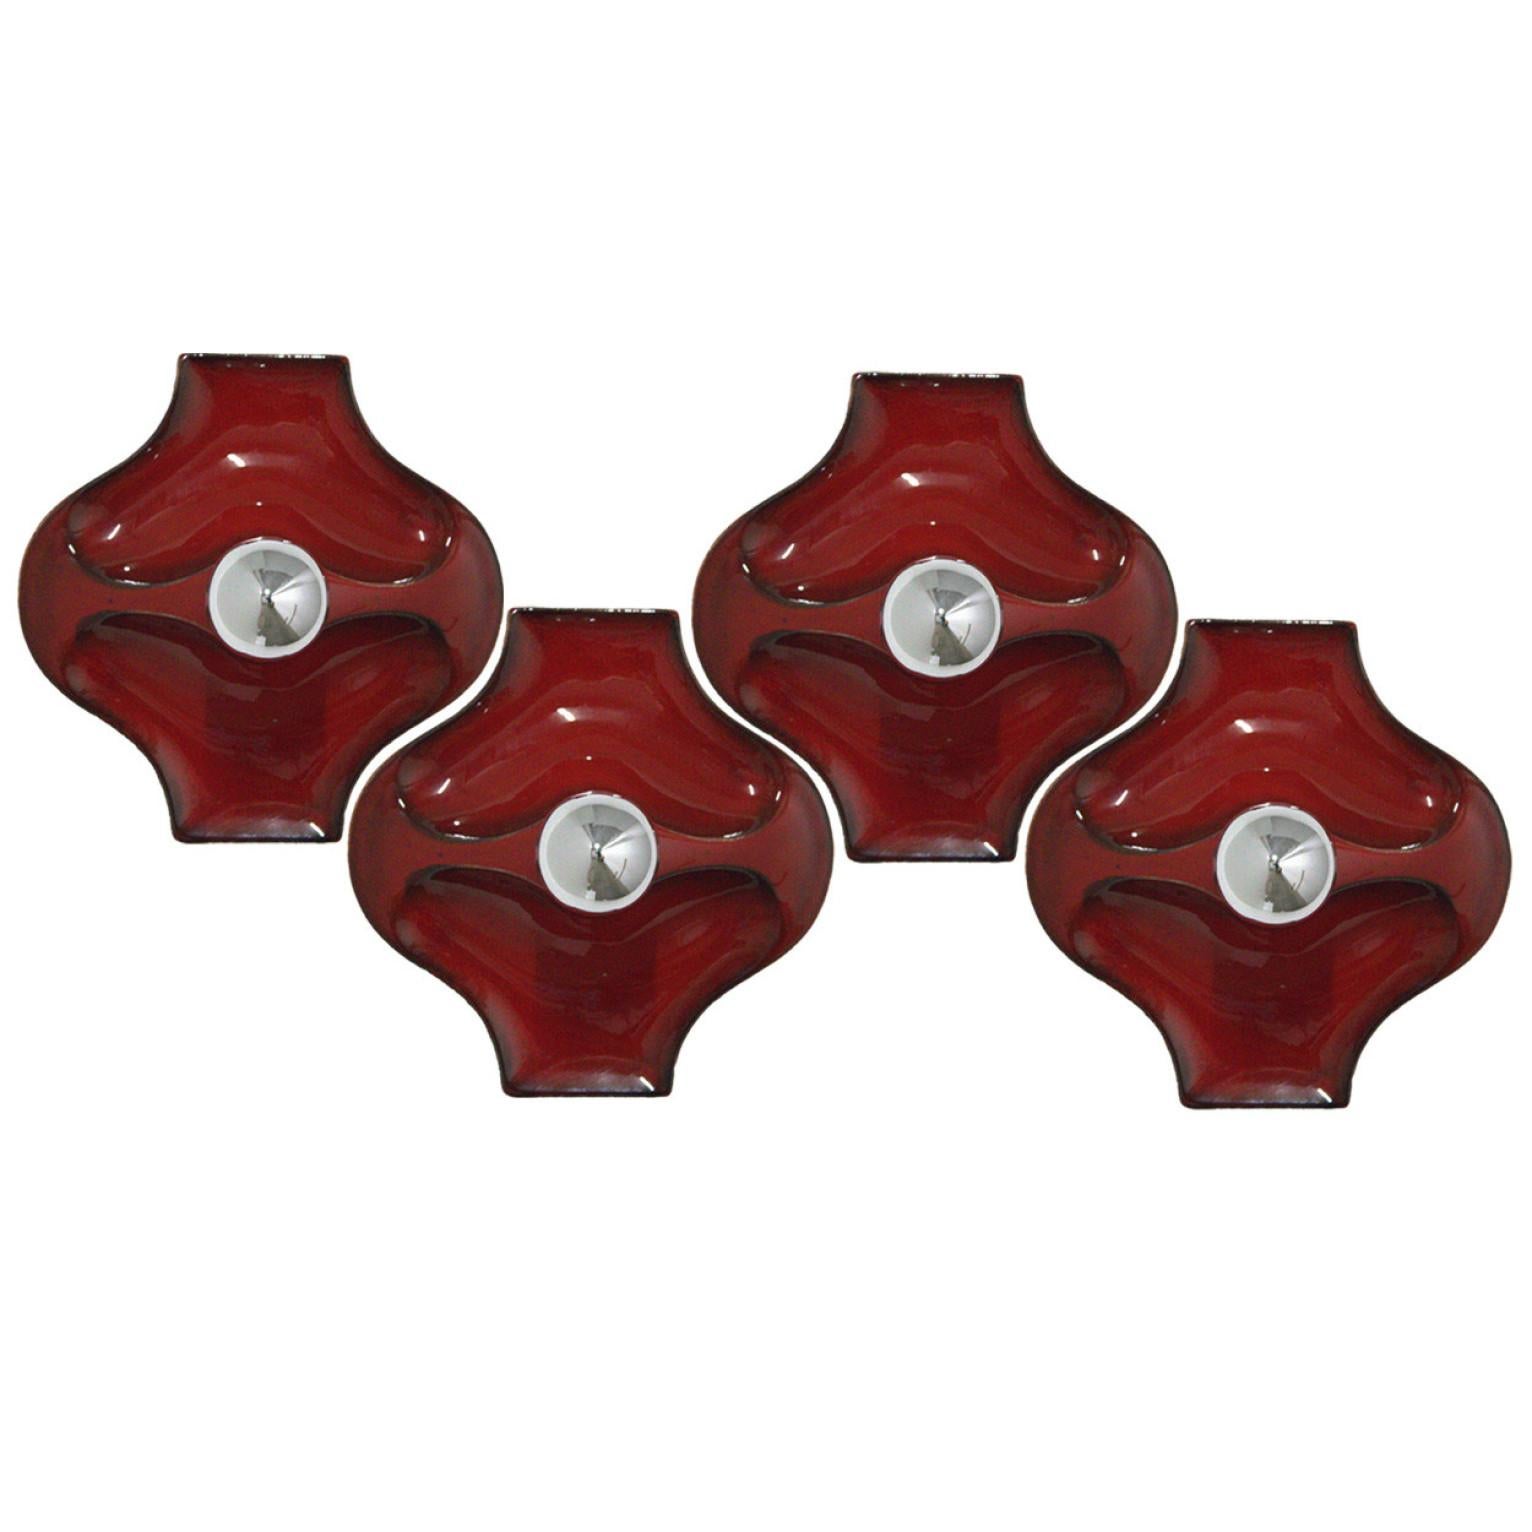 Red Ceramic Wall Lights by Hustadt Keramik, Germany, 1970 In Good Condition For Sale In Rijssen, NL